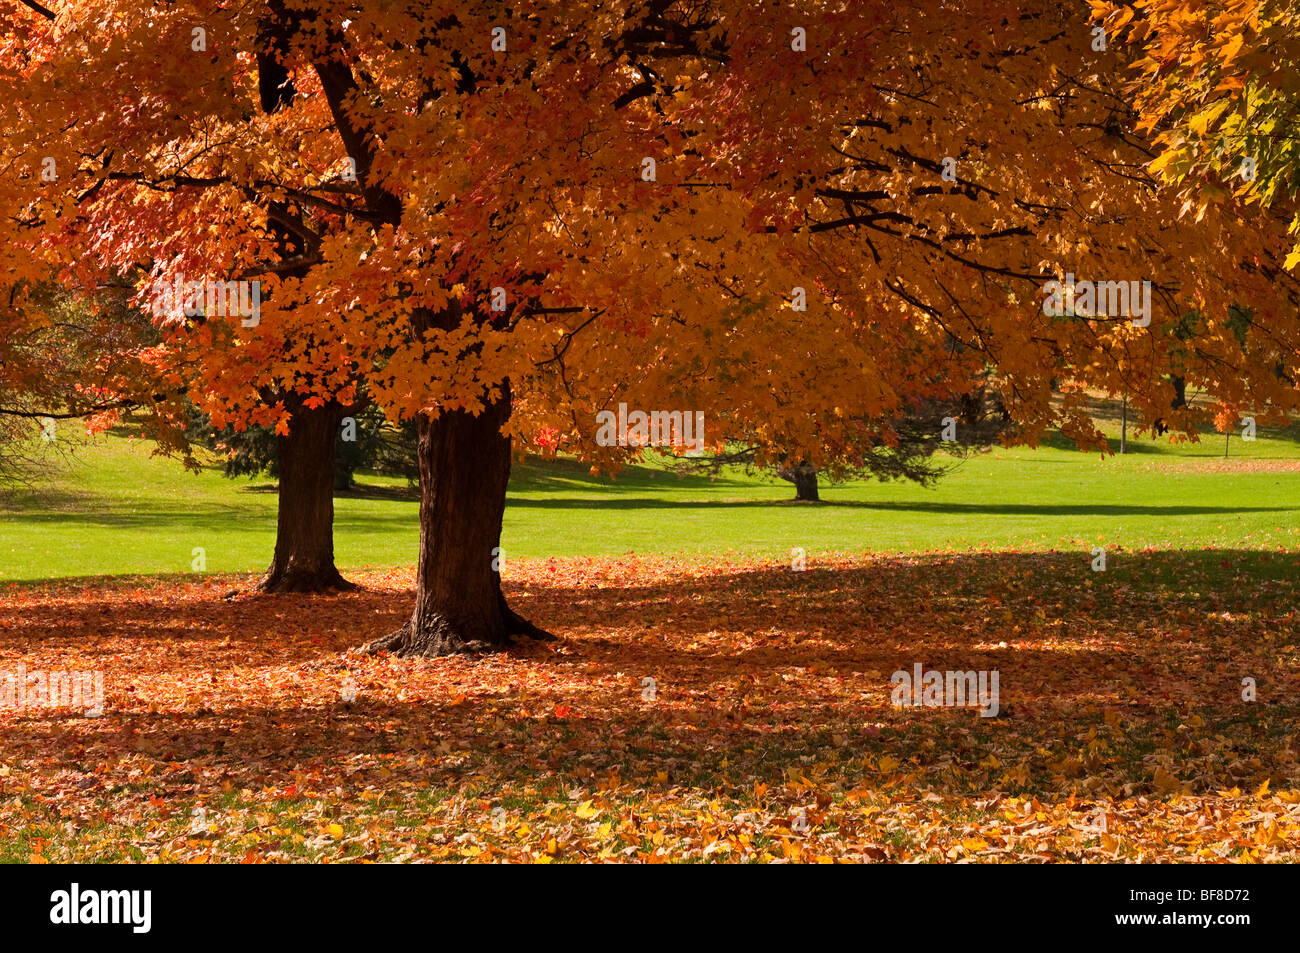 Maple trees in Park, Autumn colors. Stock Photo